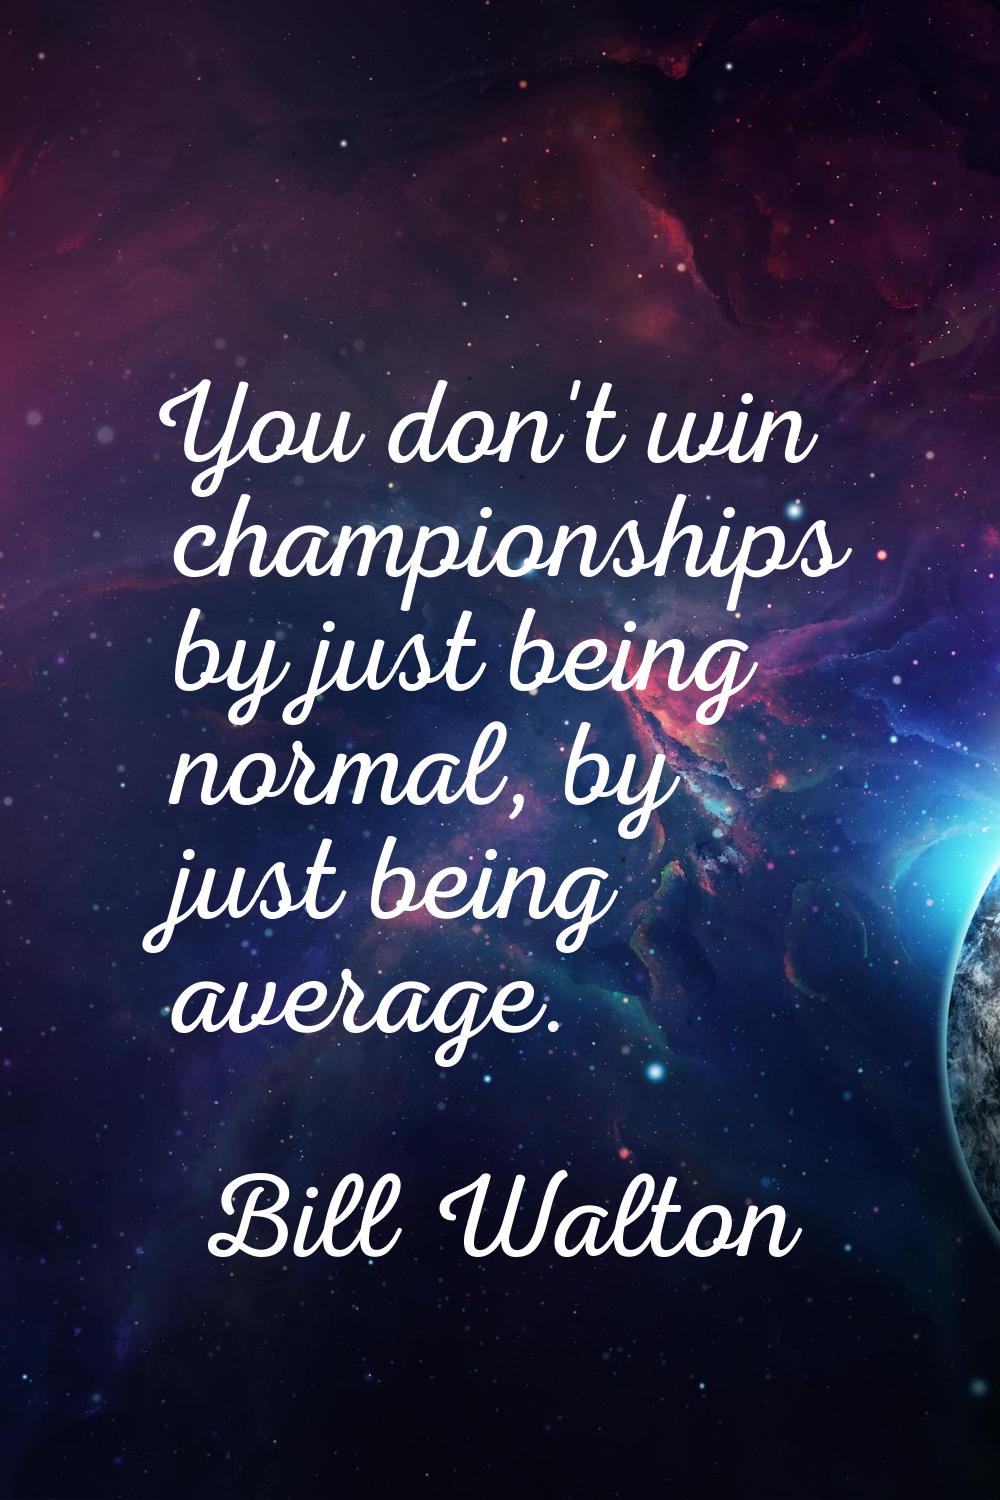 You don't win championships by just being normal, by just being average.